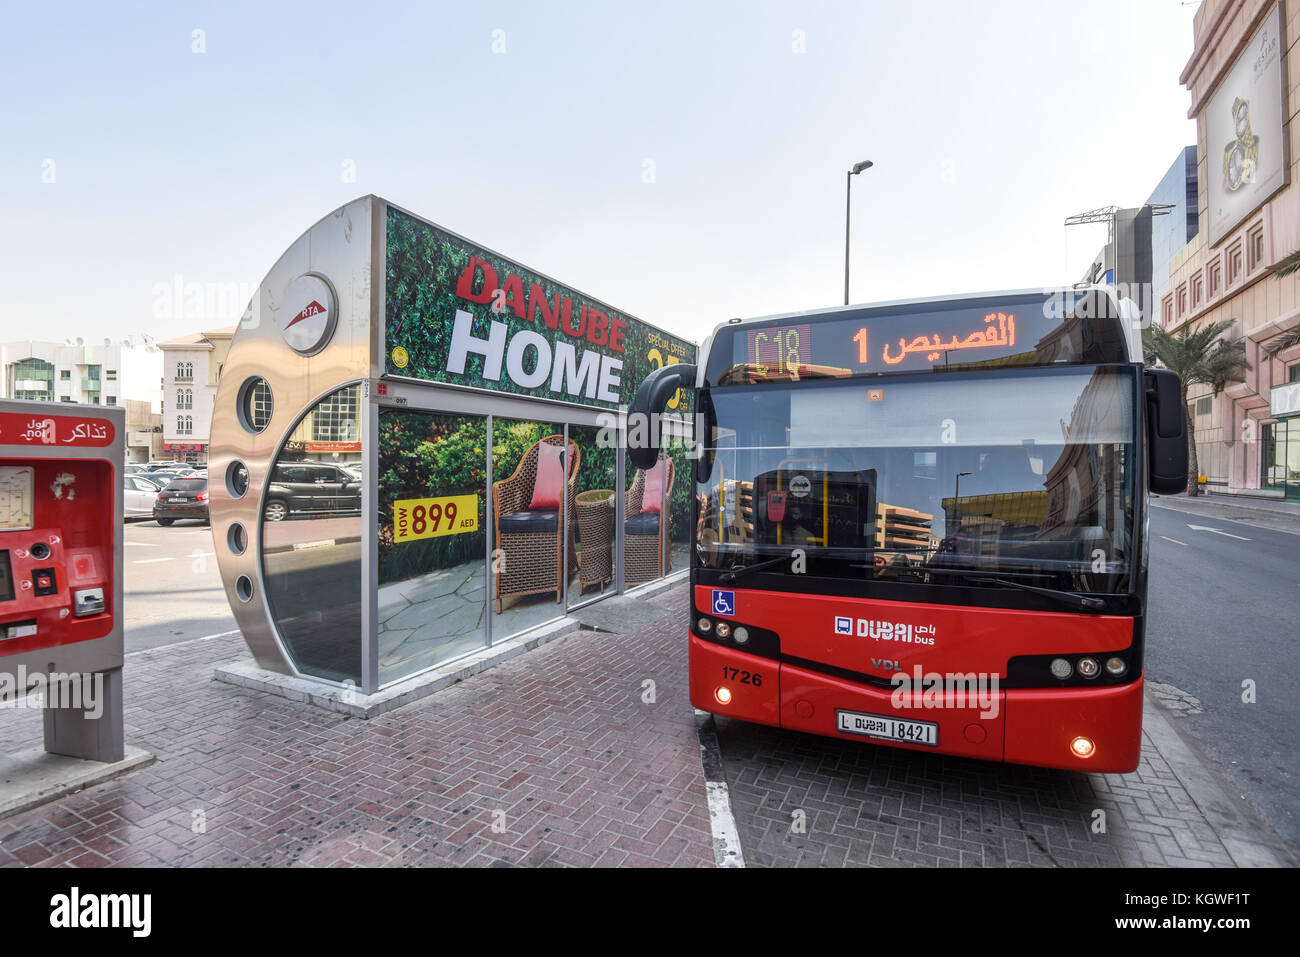 DUBAI, UAE - 30OCT2017: Dubai Bus outside Lamcy Plaza. Because of the extreme climate, many bus shelters are air-conditioned, Stock Photo